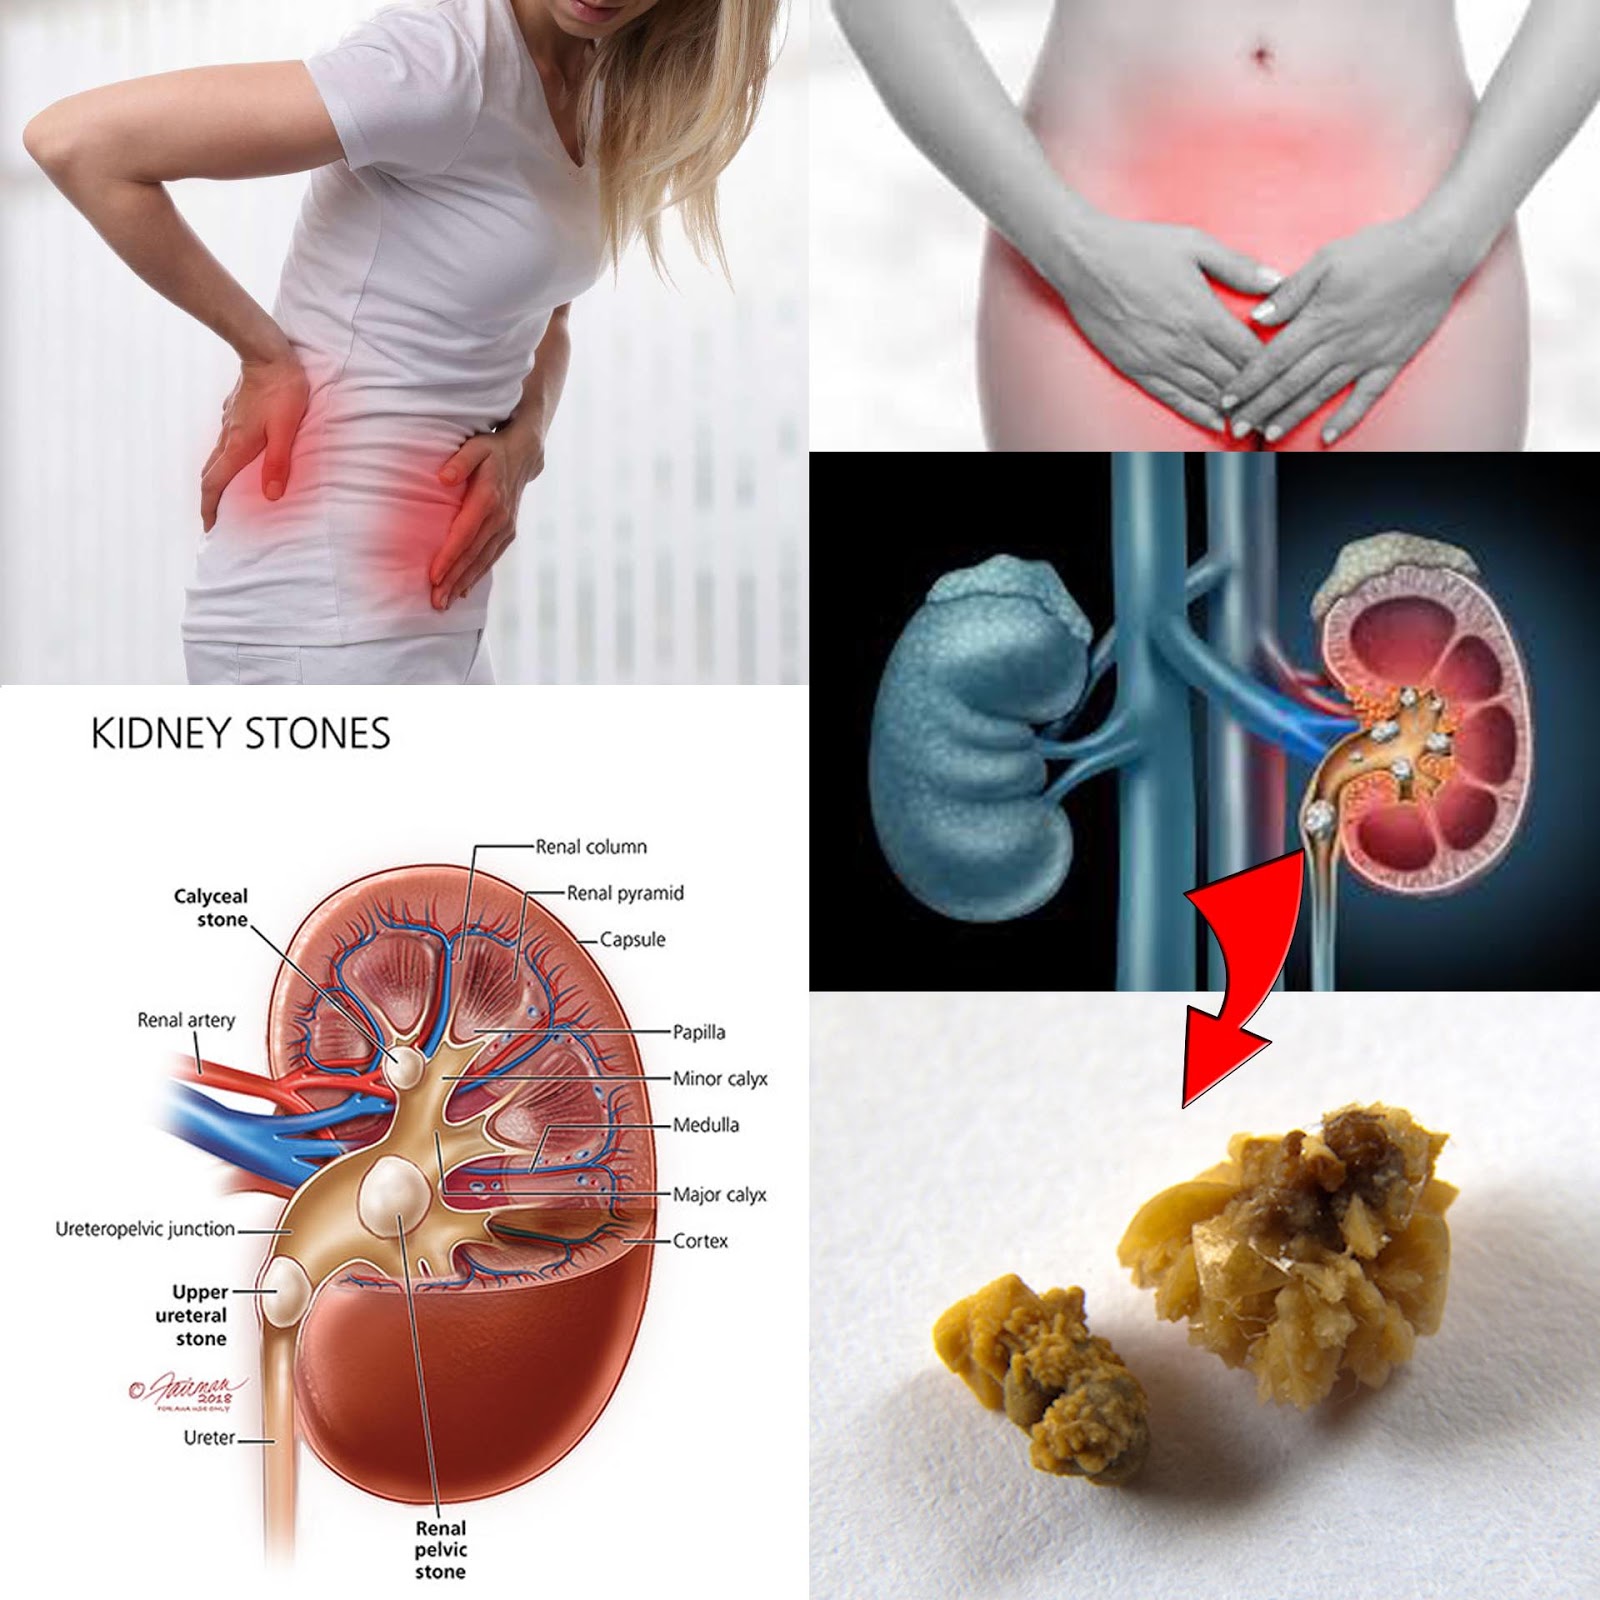 What Are Two Types Of Kidney Stones